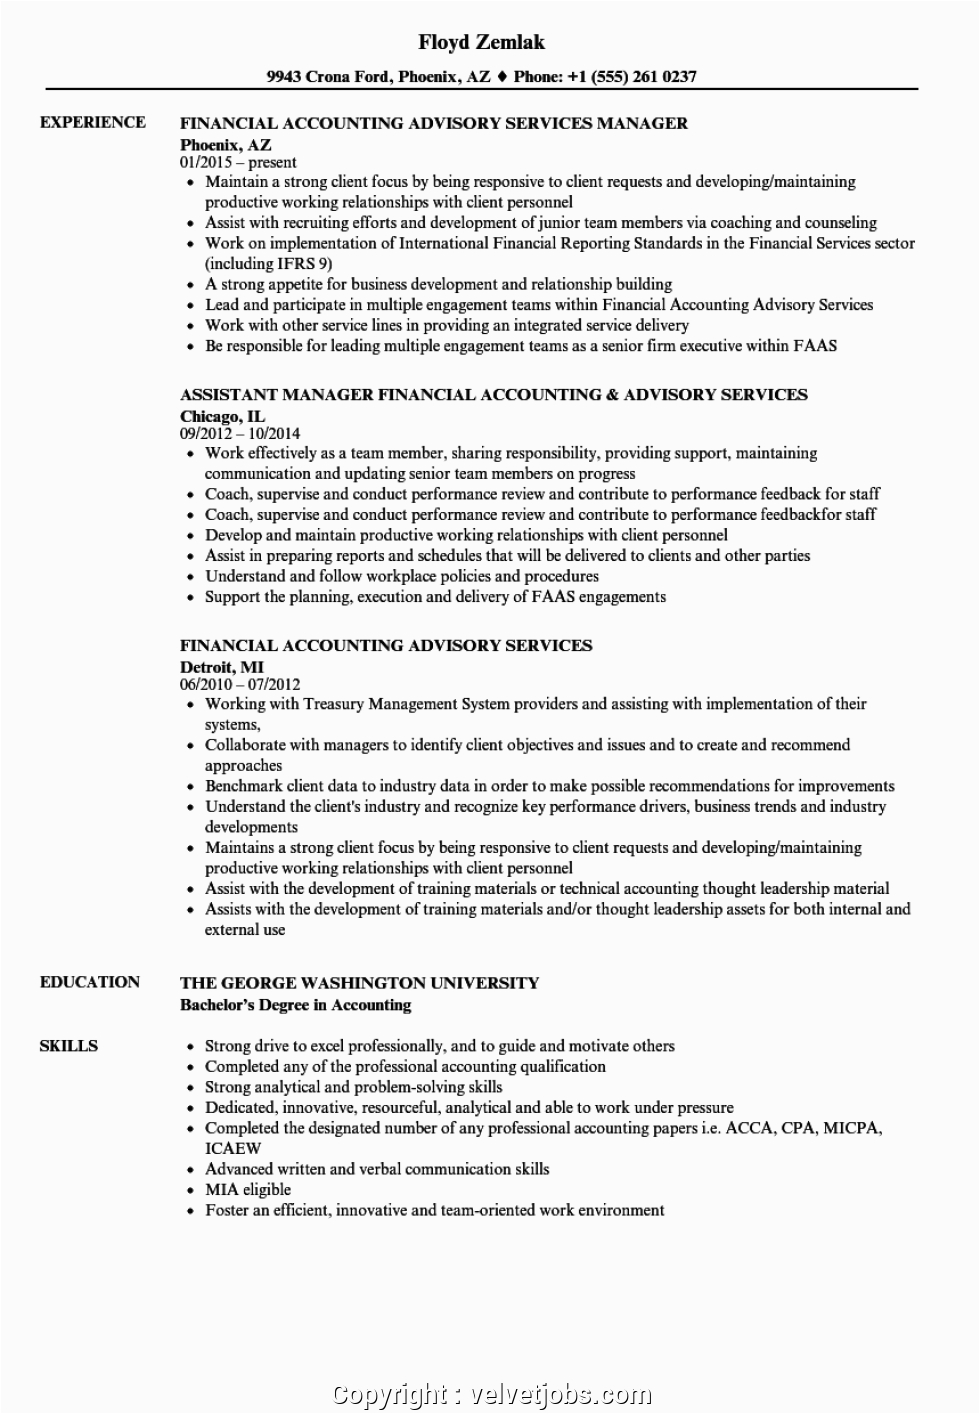 Sample Resumes for Accountants and Financial Professionals Modern Financial Accountant Cv Financial Accounting